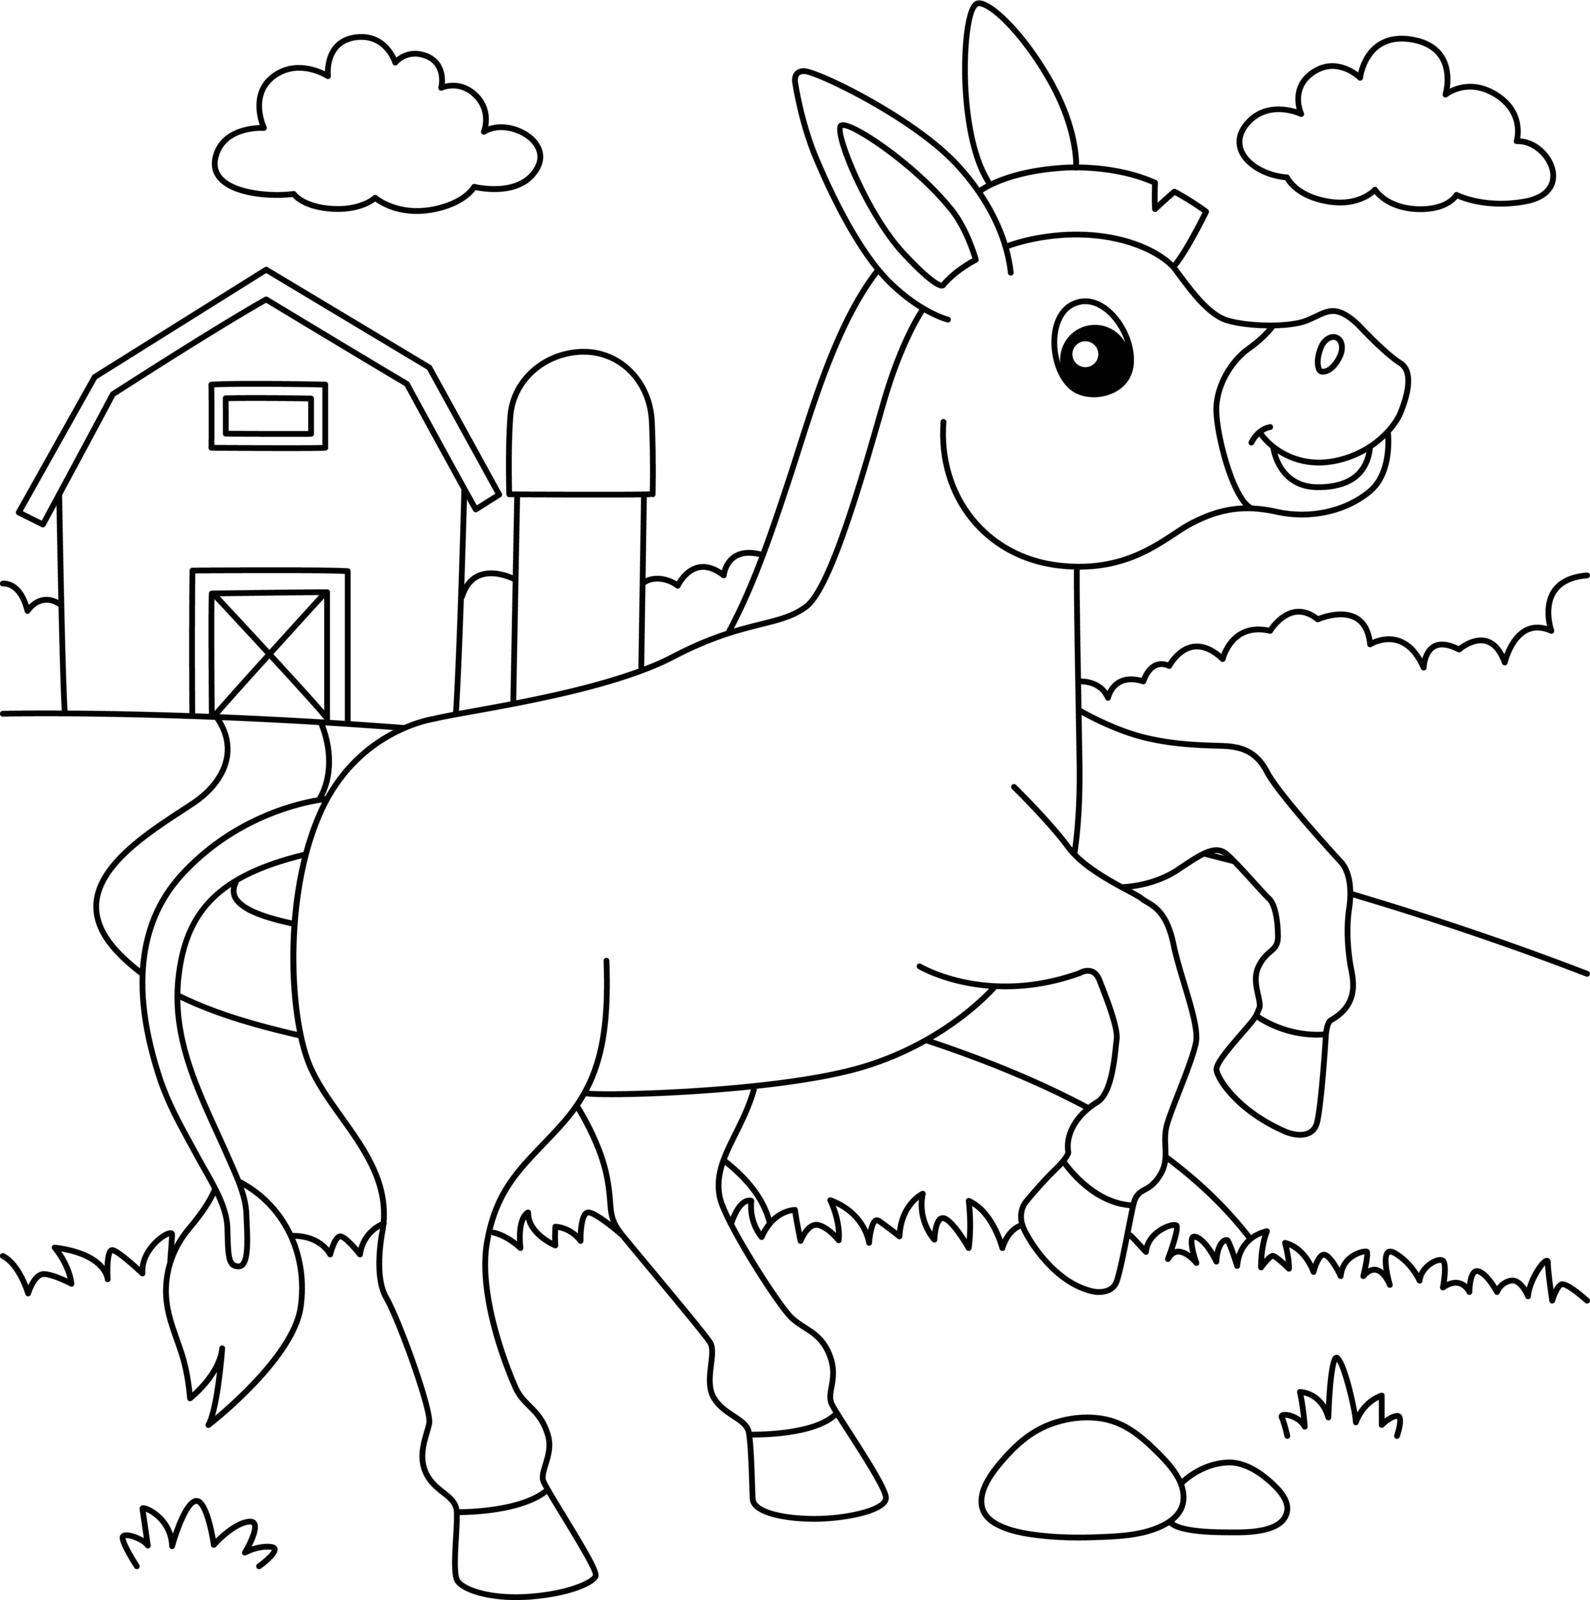 A cute and funny coloring page of a donkey farm animal. Provides hours of coloring fun for children. To color, this page is very easy. Suitable for little kids and toddlers.